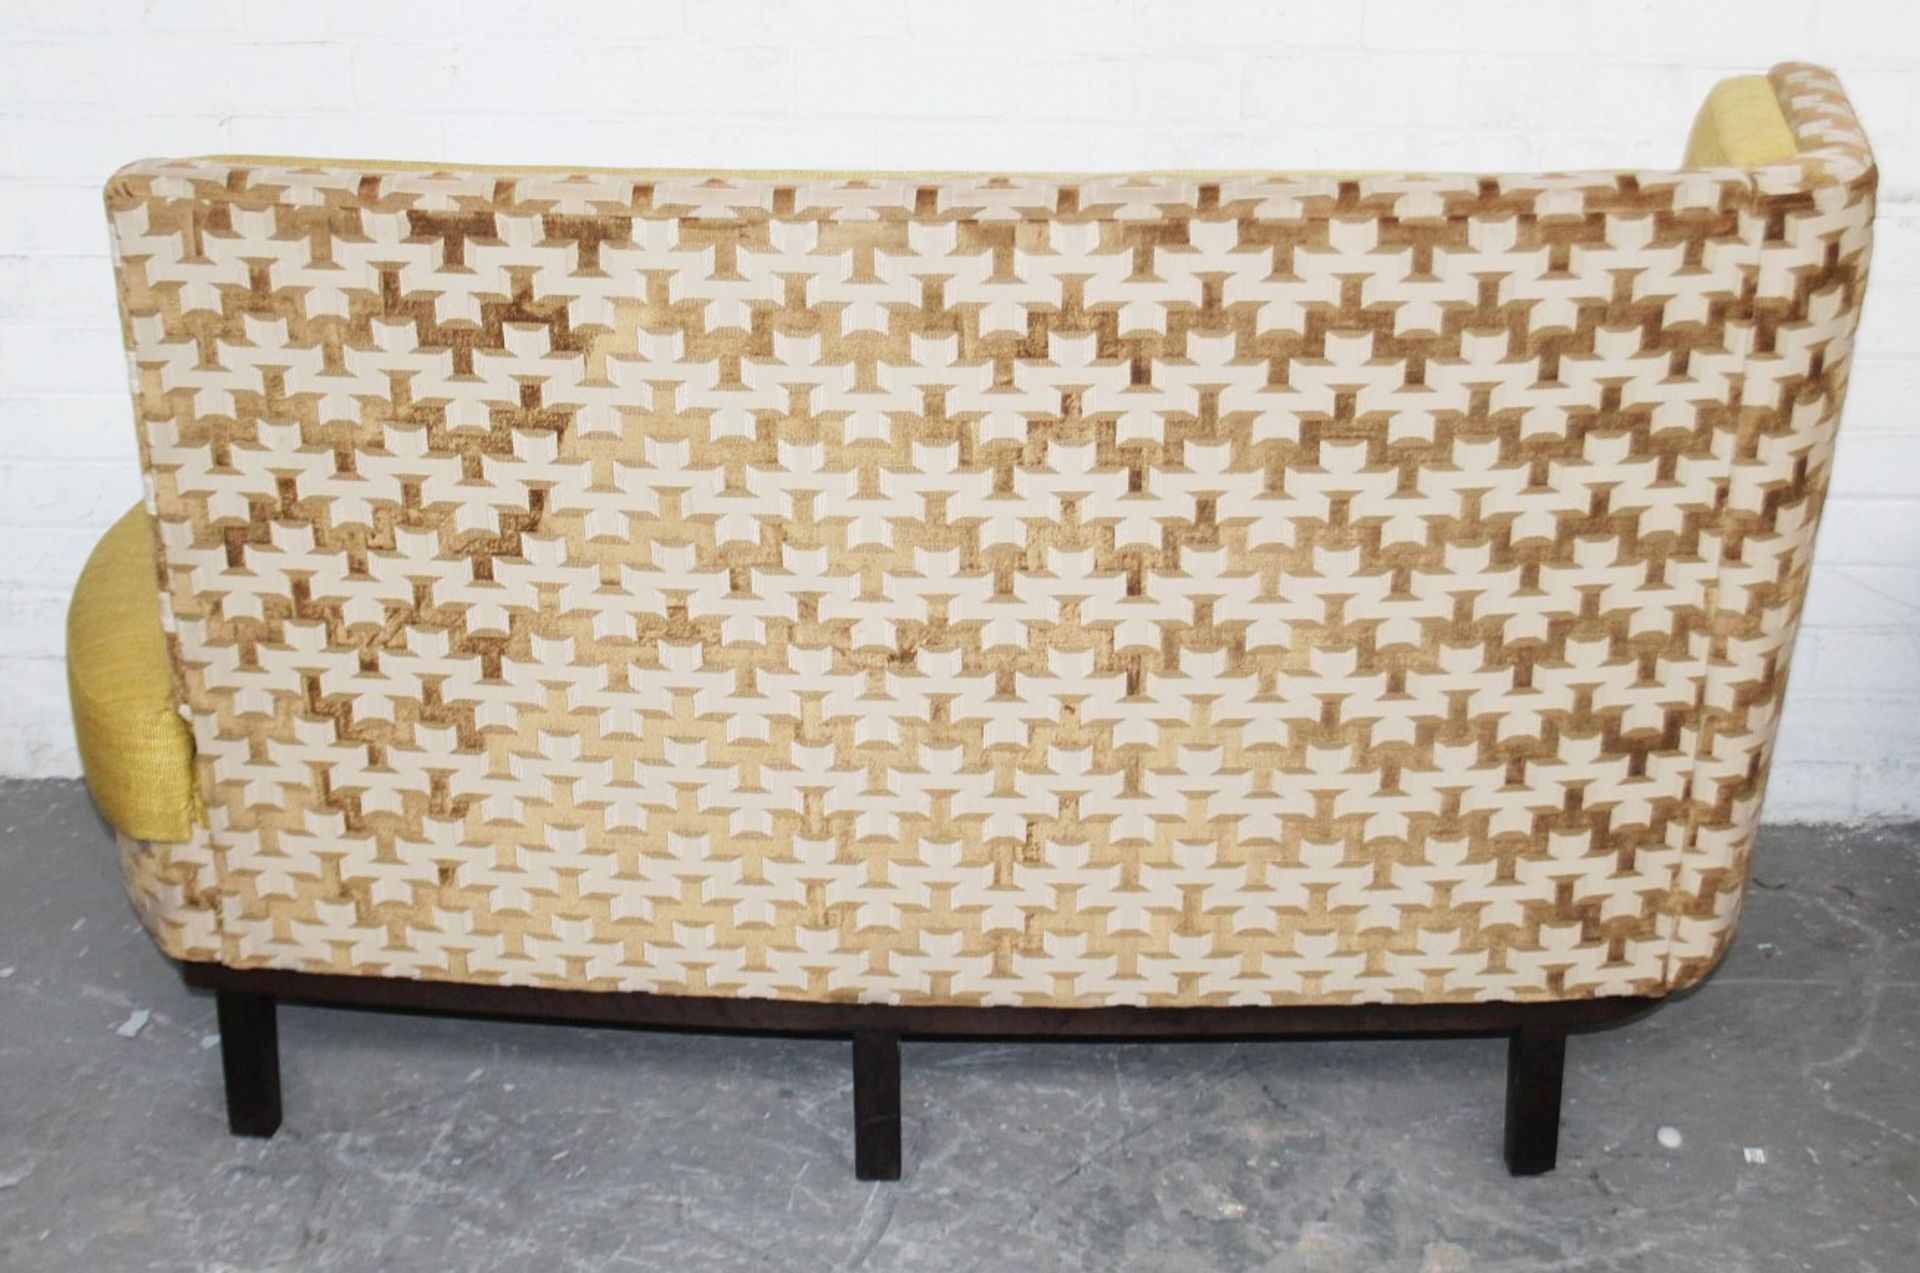 1 x Commercial Freestanding Left-Hand 2-Seater Bench, Upholstered In Premium Gold-Coloured - Image 2 of 8